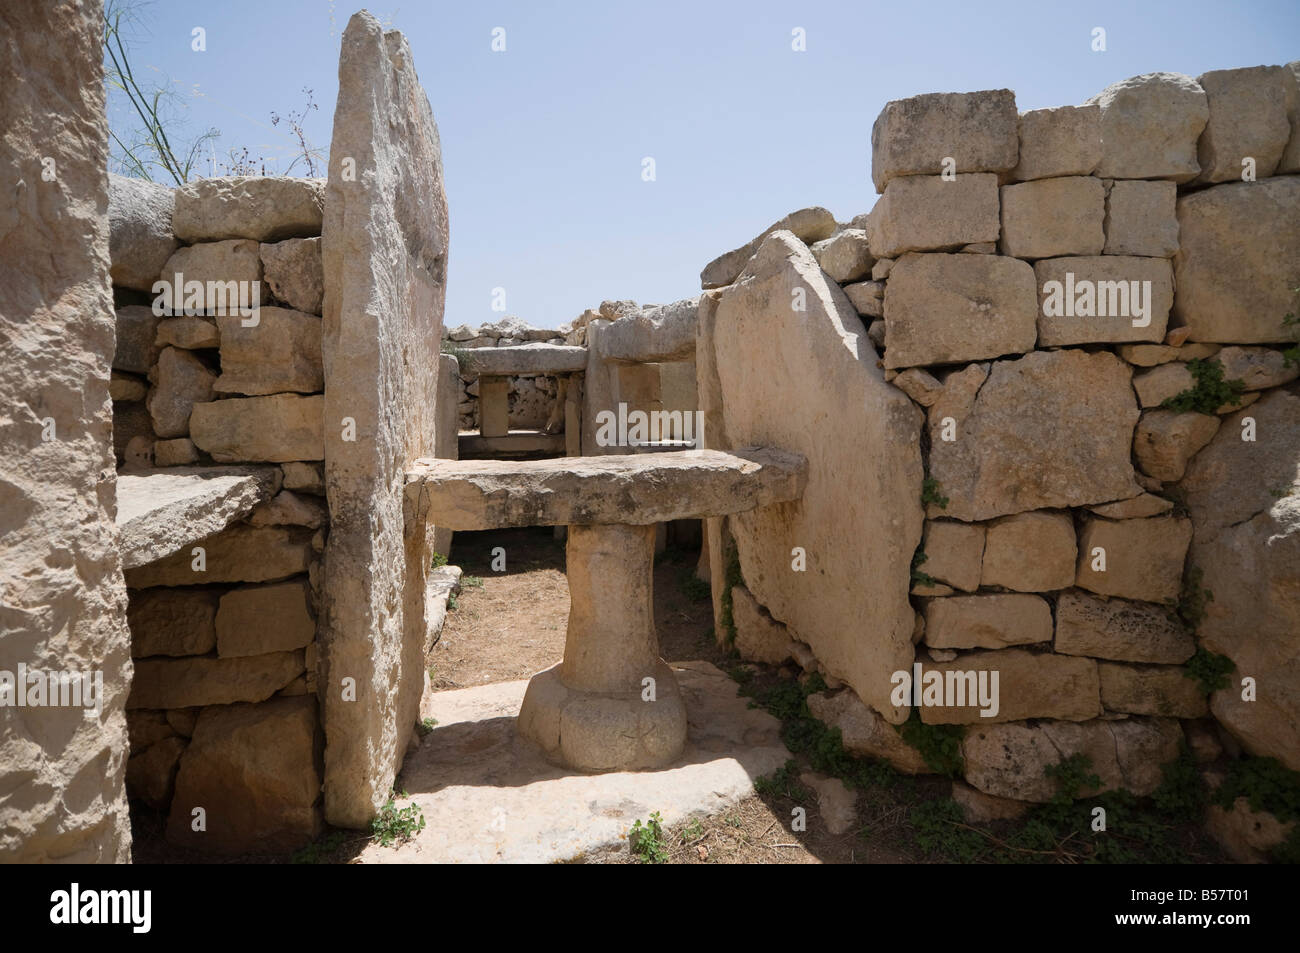 Mnajdra, a Megalithic temple constructed at the end of the third millennium BC, UNESCO World Heritage Site, Malta, Europe Stock Photo